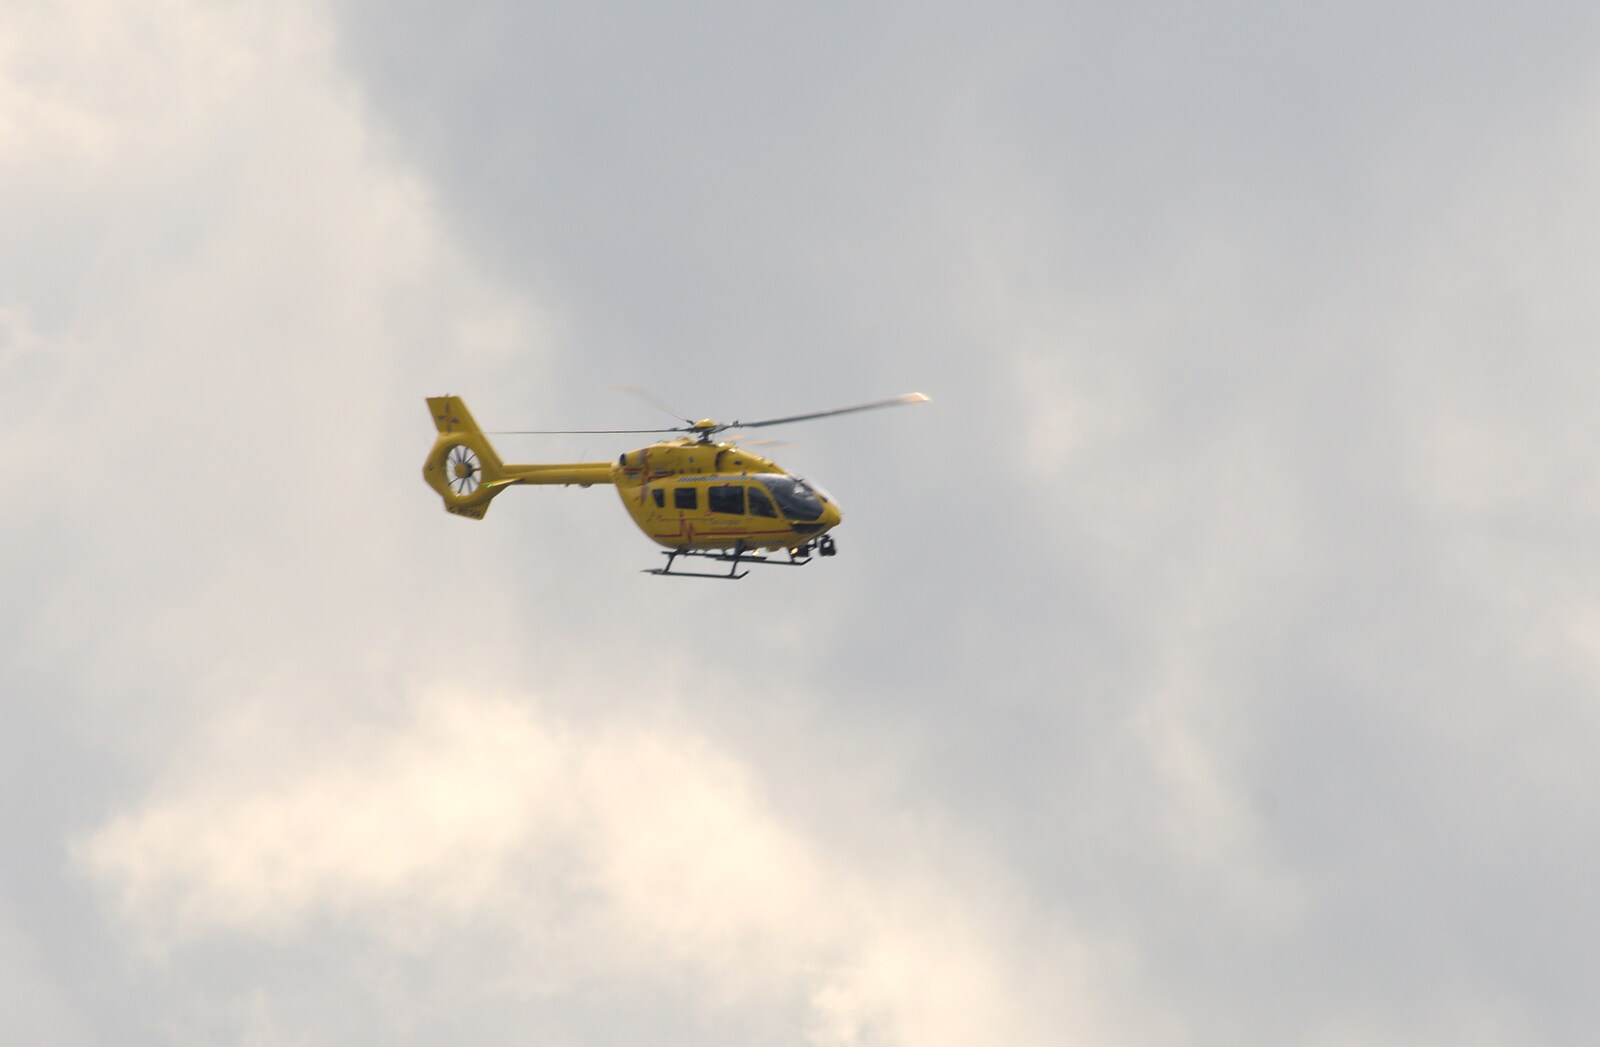 The East Anglian Air Ambulance is out again from A Trip to Orford, Suffolk - 29th August 2020